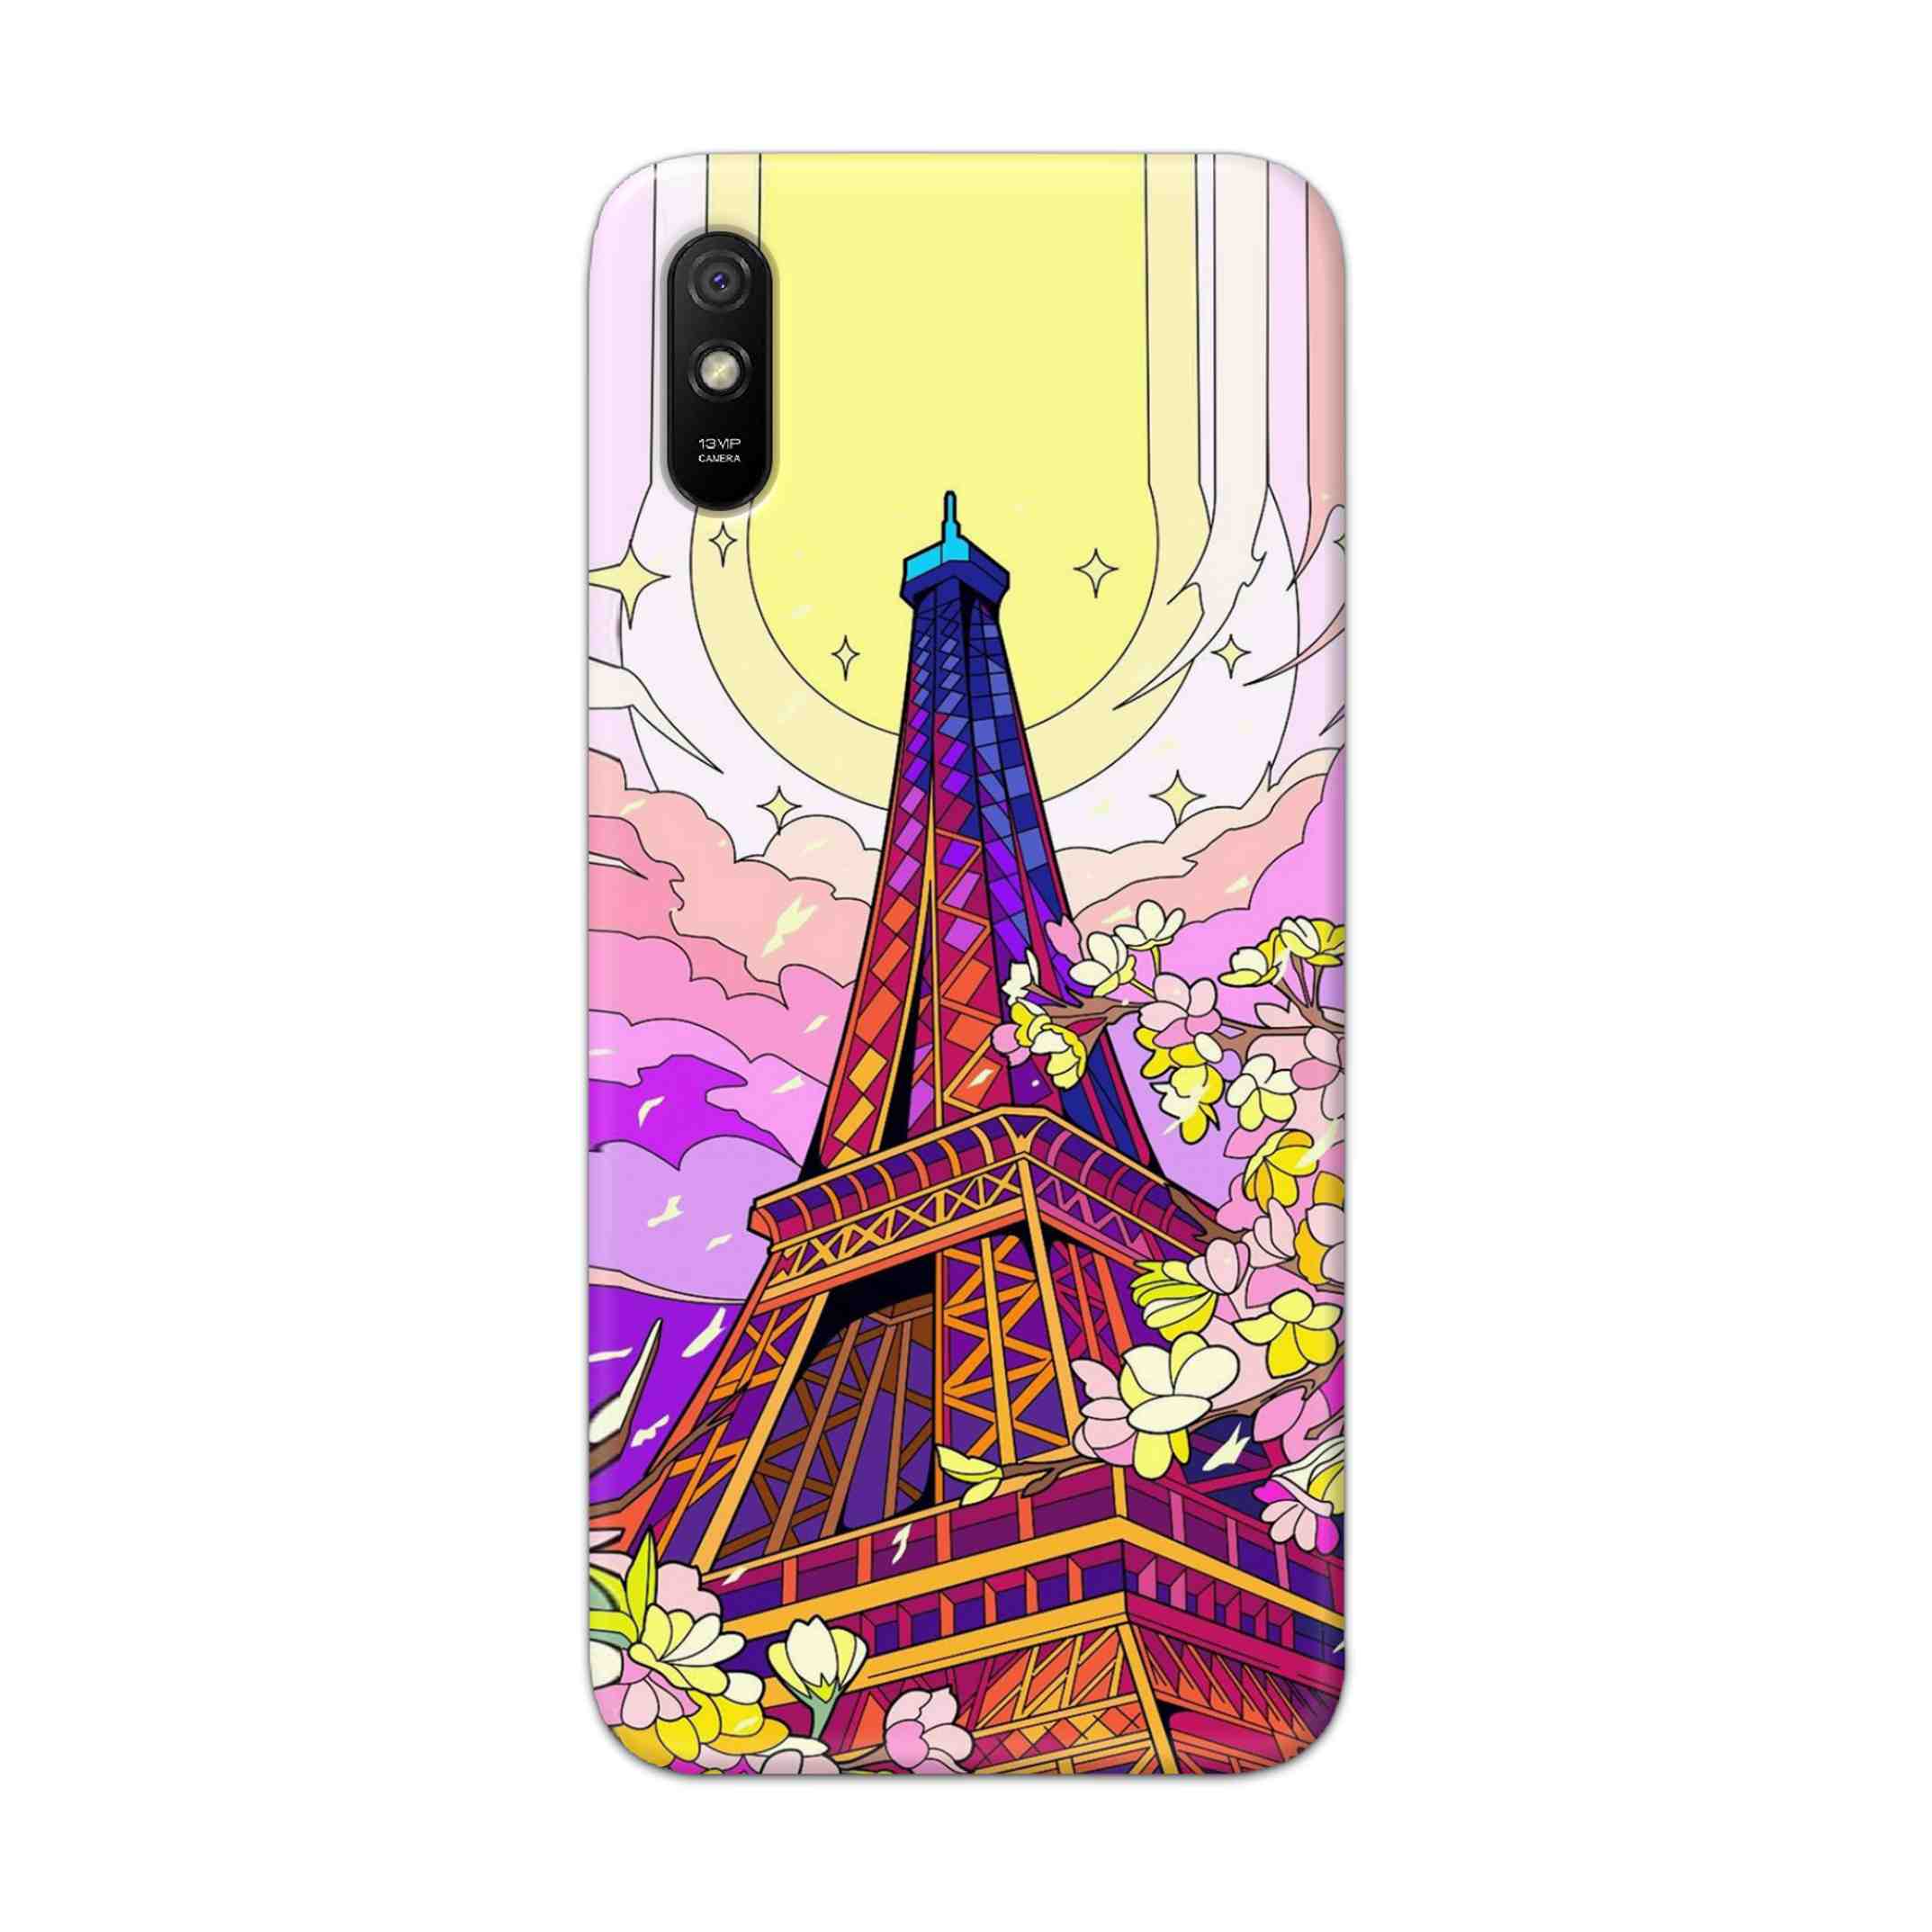 Buy Eiffel Tower Hard Back Mobile Phone Case Cover For Redmi 9A Online